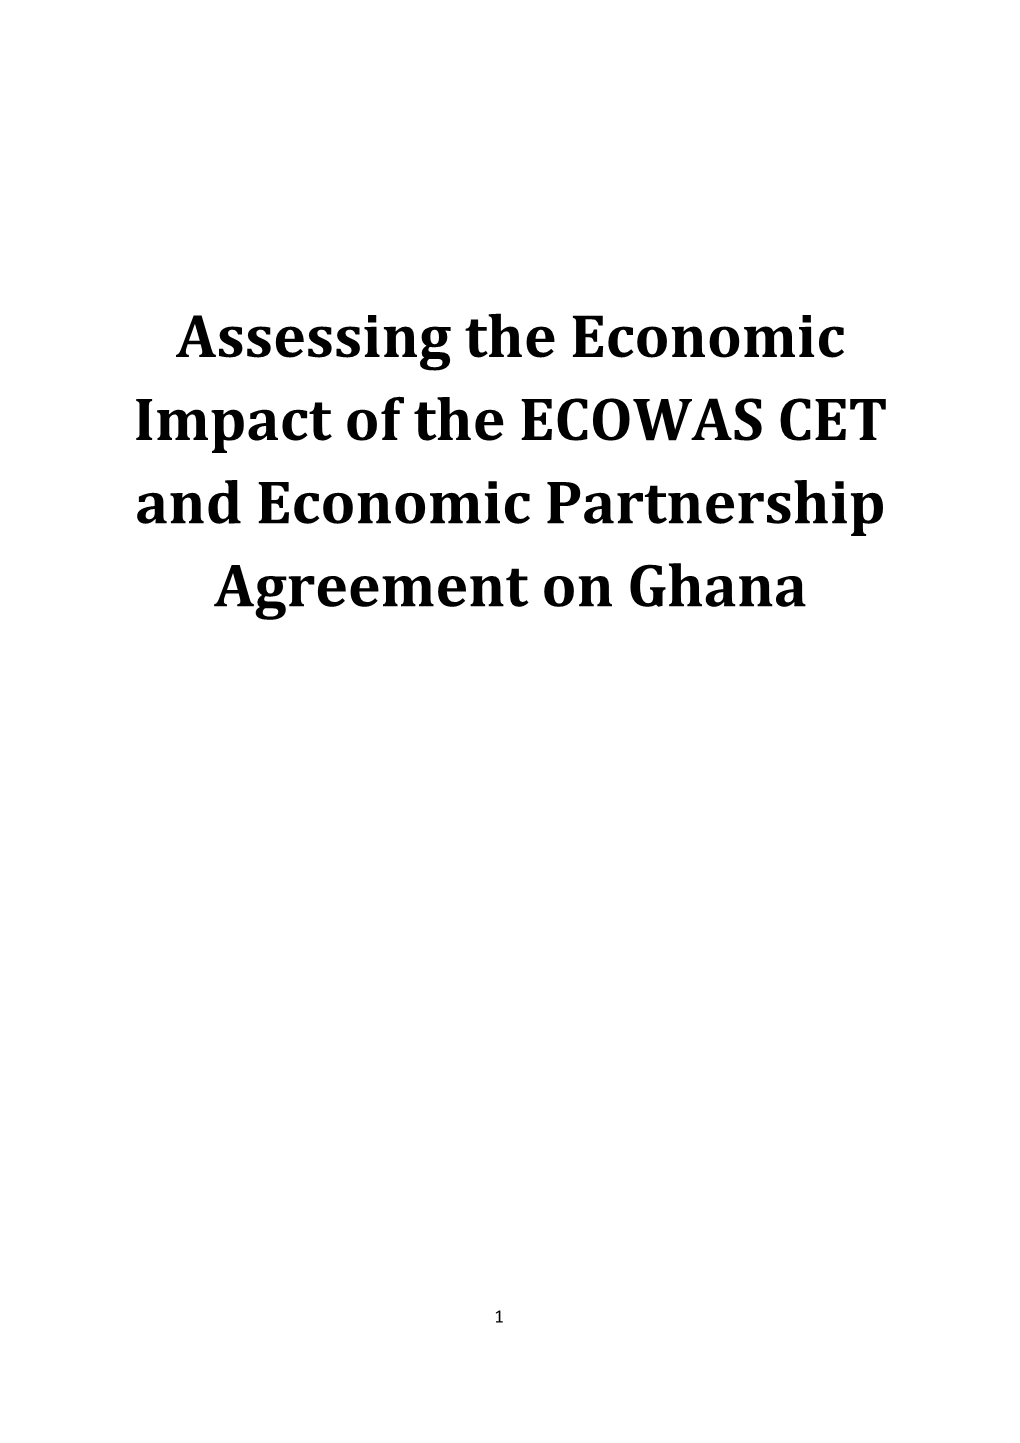 Assessing the Economic Impact of the ECOWAS CET and Economic Partnership Agreement on Ghana